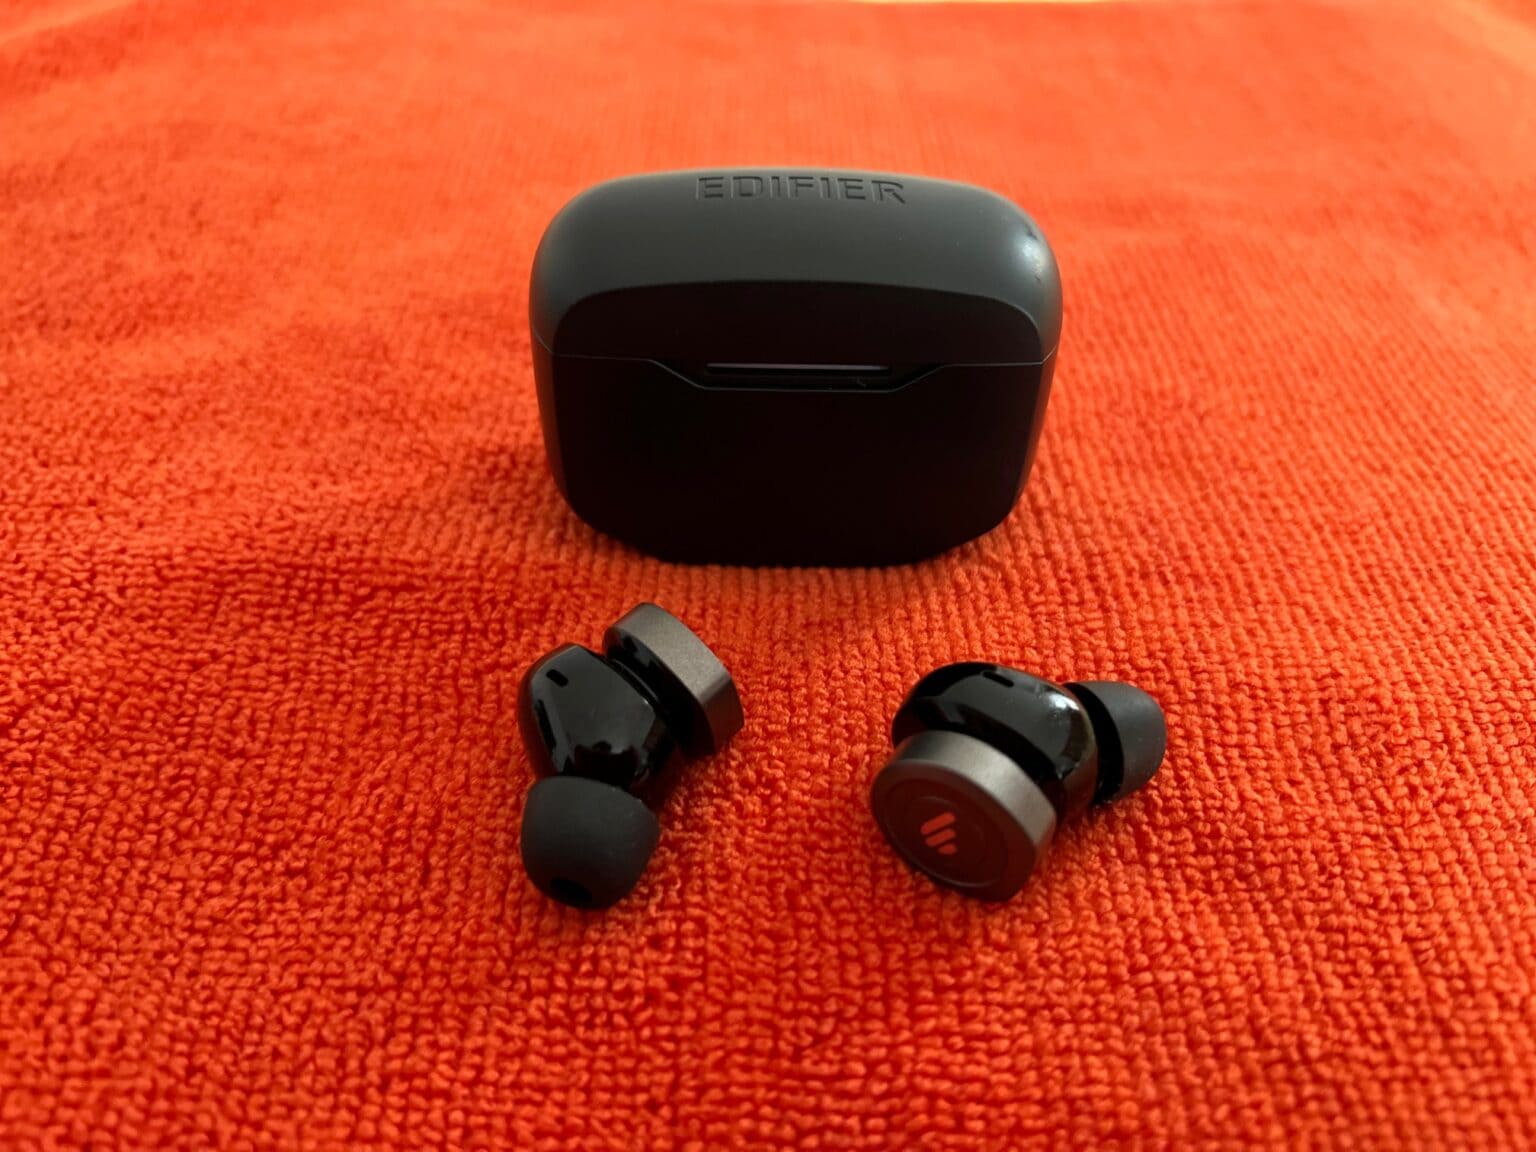 Edifier's new W240TN wireless earbuds have a bit of an industrial look going.